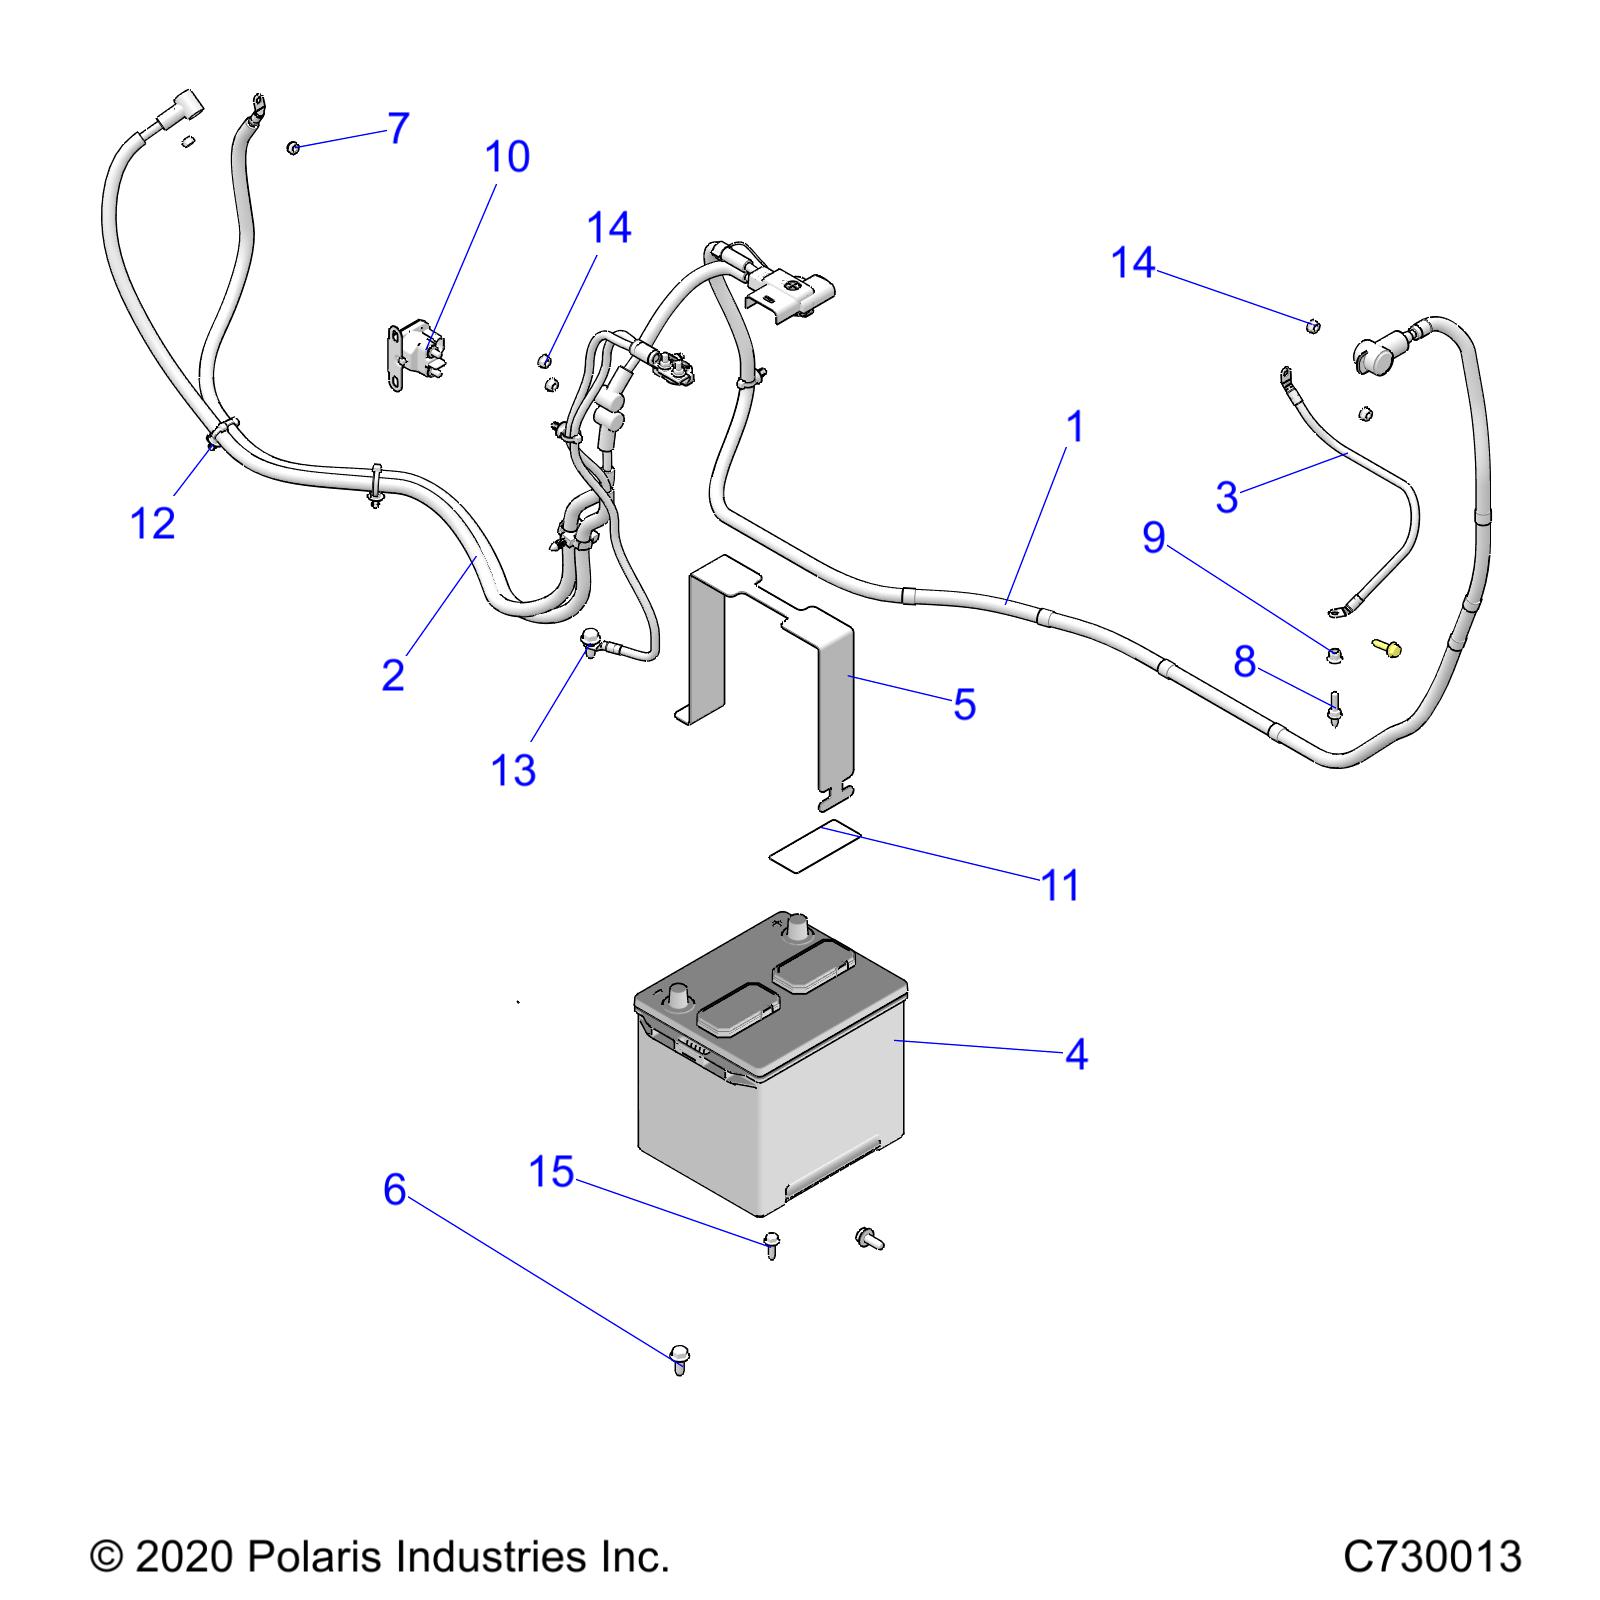 Part Number : 4019583 CABLE-BATTERY TO SOLENOID FS